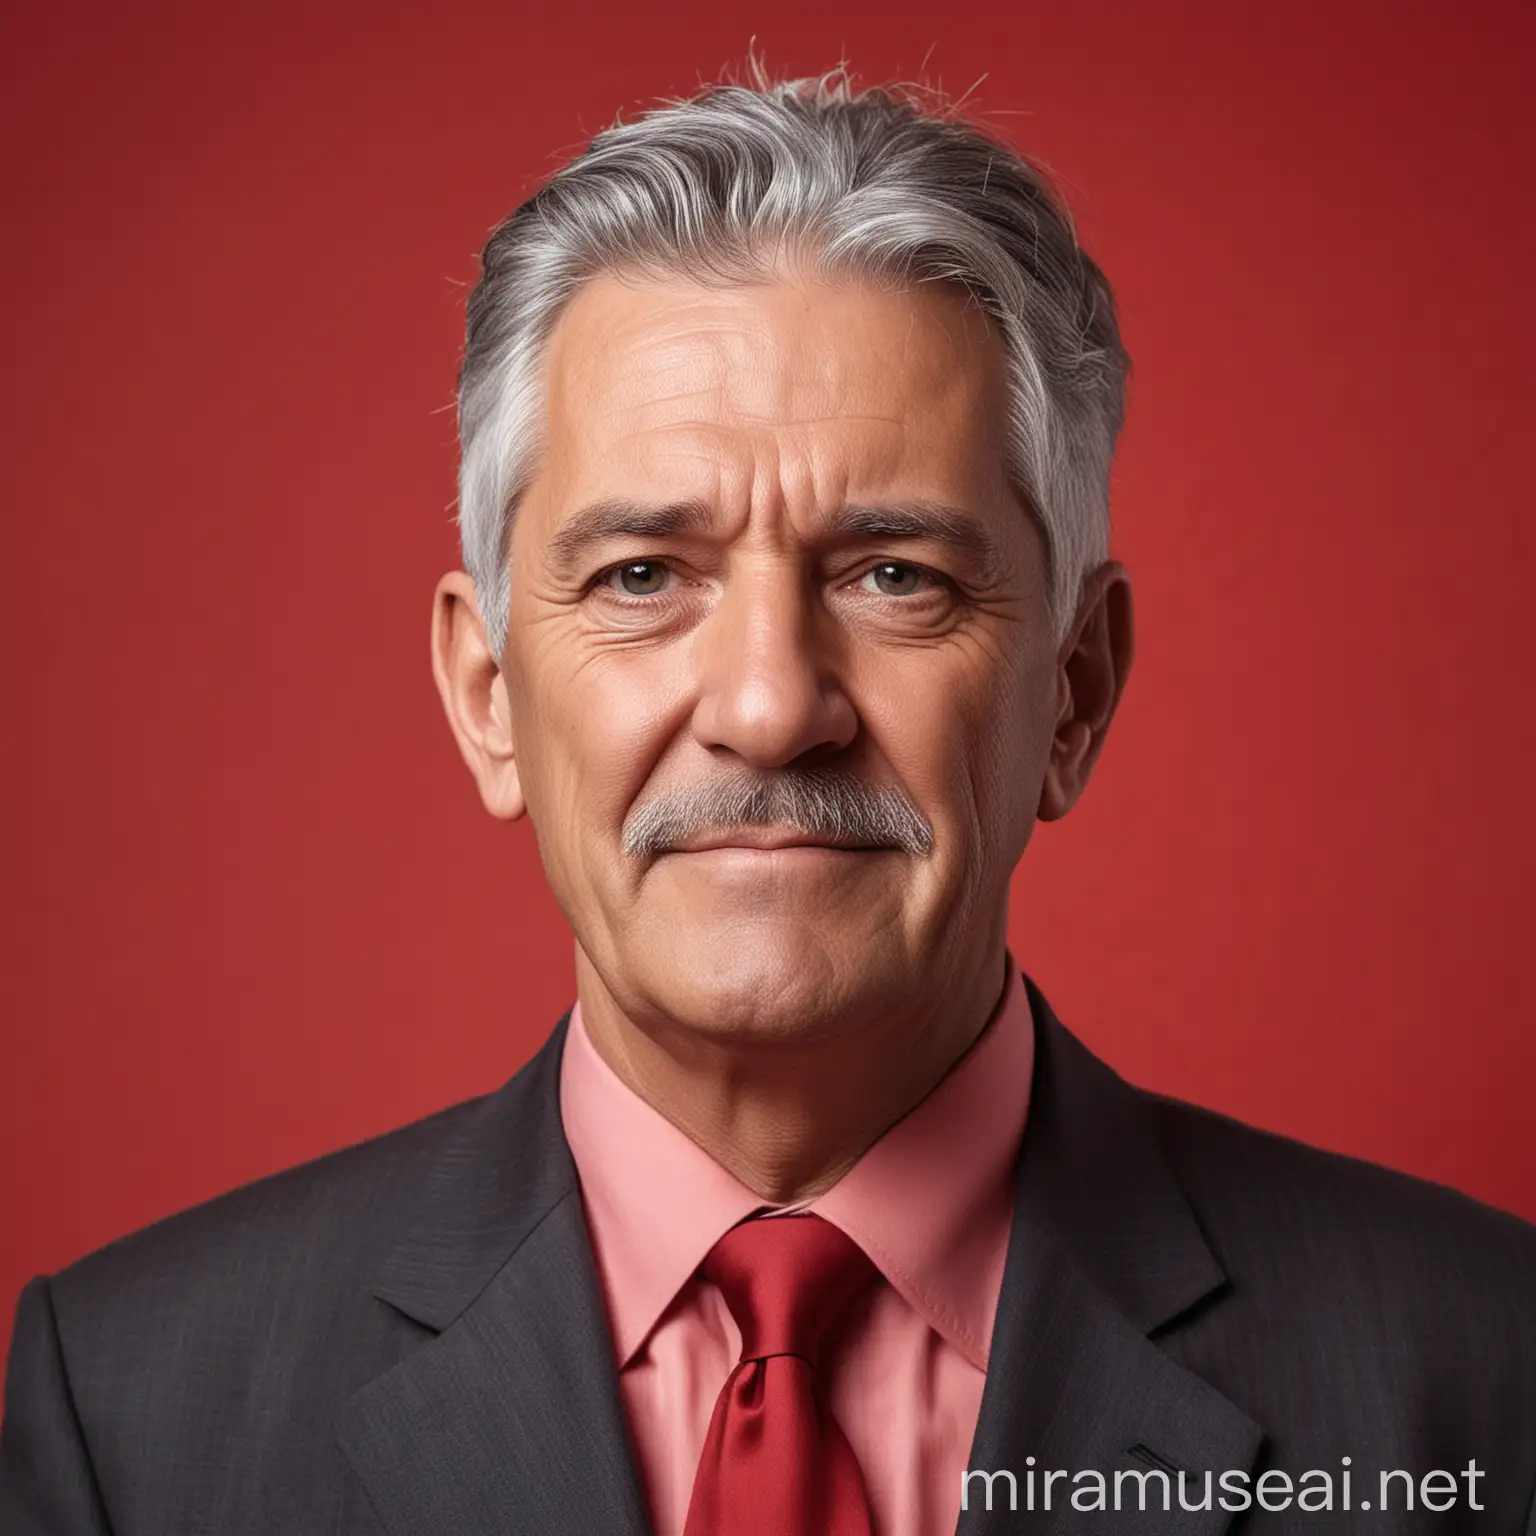 Elderly Politician with Gray Hair on Vibrant Red Background